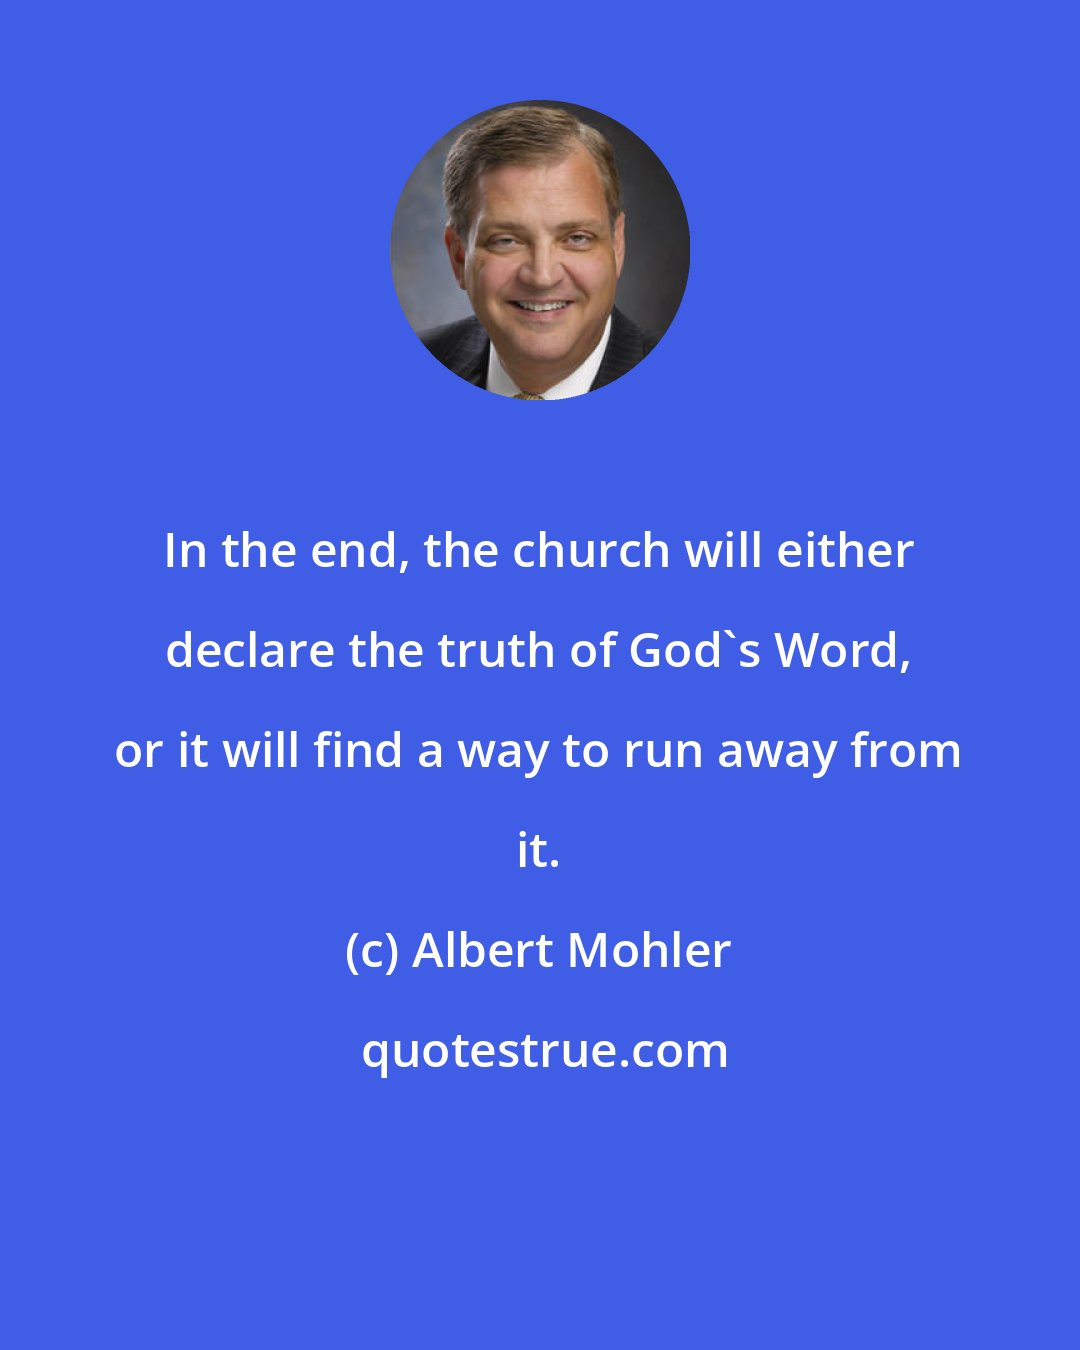 Albert Mohler: In the end, the church will either declare the truth of God's Word, or it will find a way to run away from it.